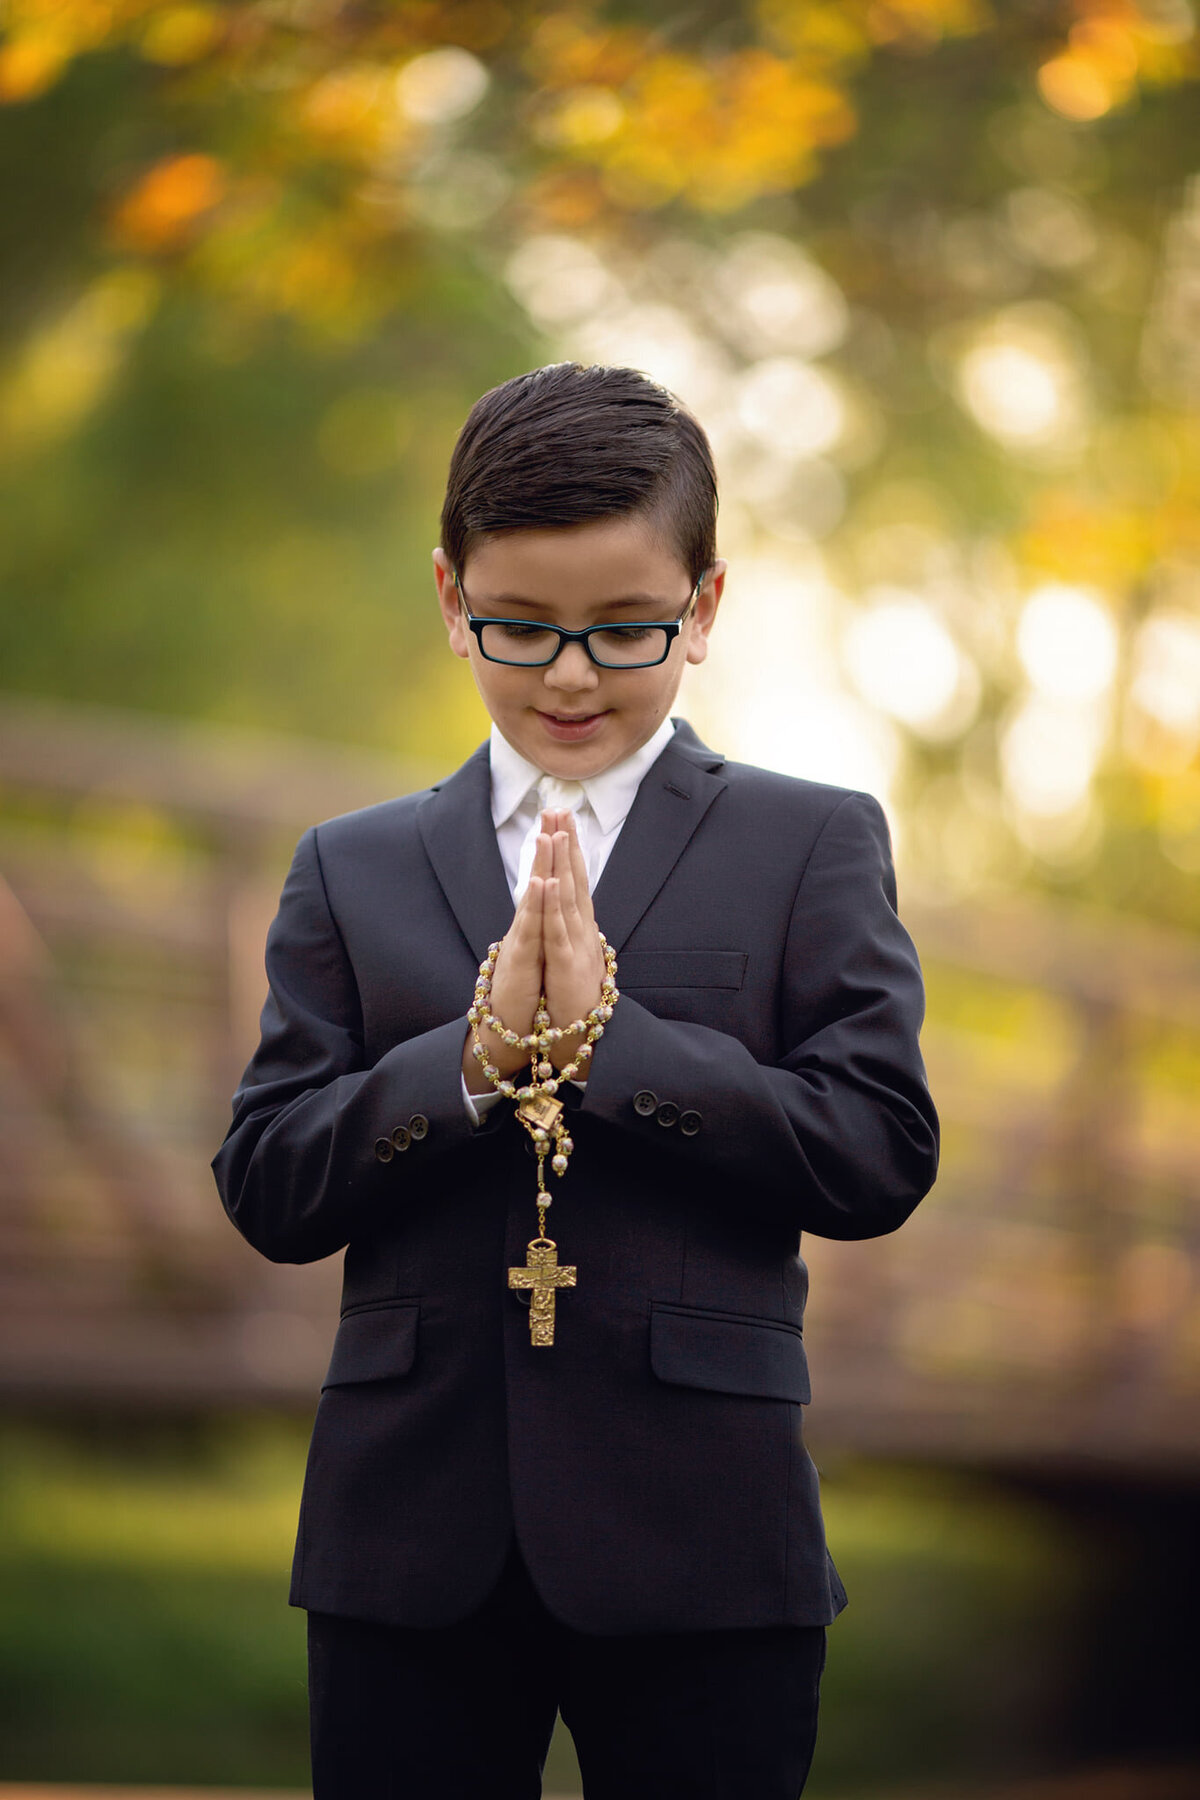 A young boy in a black suit prays in a park at sunset with gold rosary beads taken by a New Jersey Communion Portrait Photographer